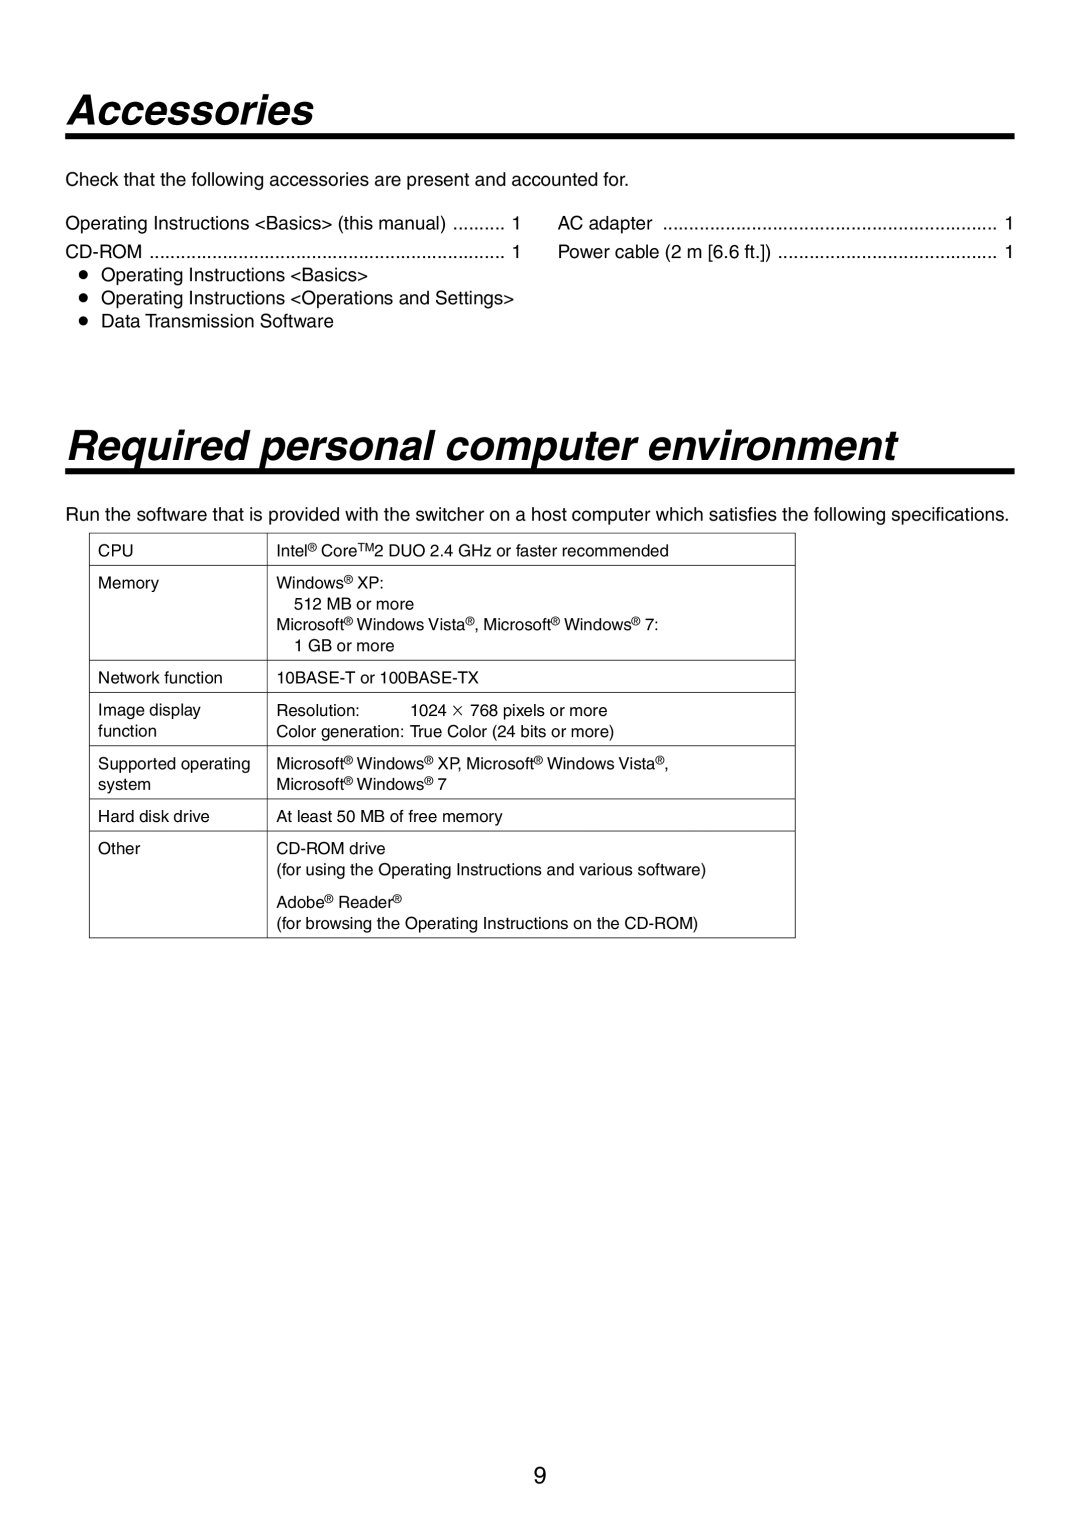 Panasonic AW-HS50N operating instructions Accessories, Required personal computer environment, AC adapter 